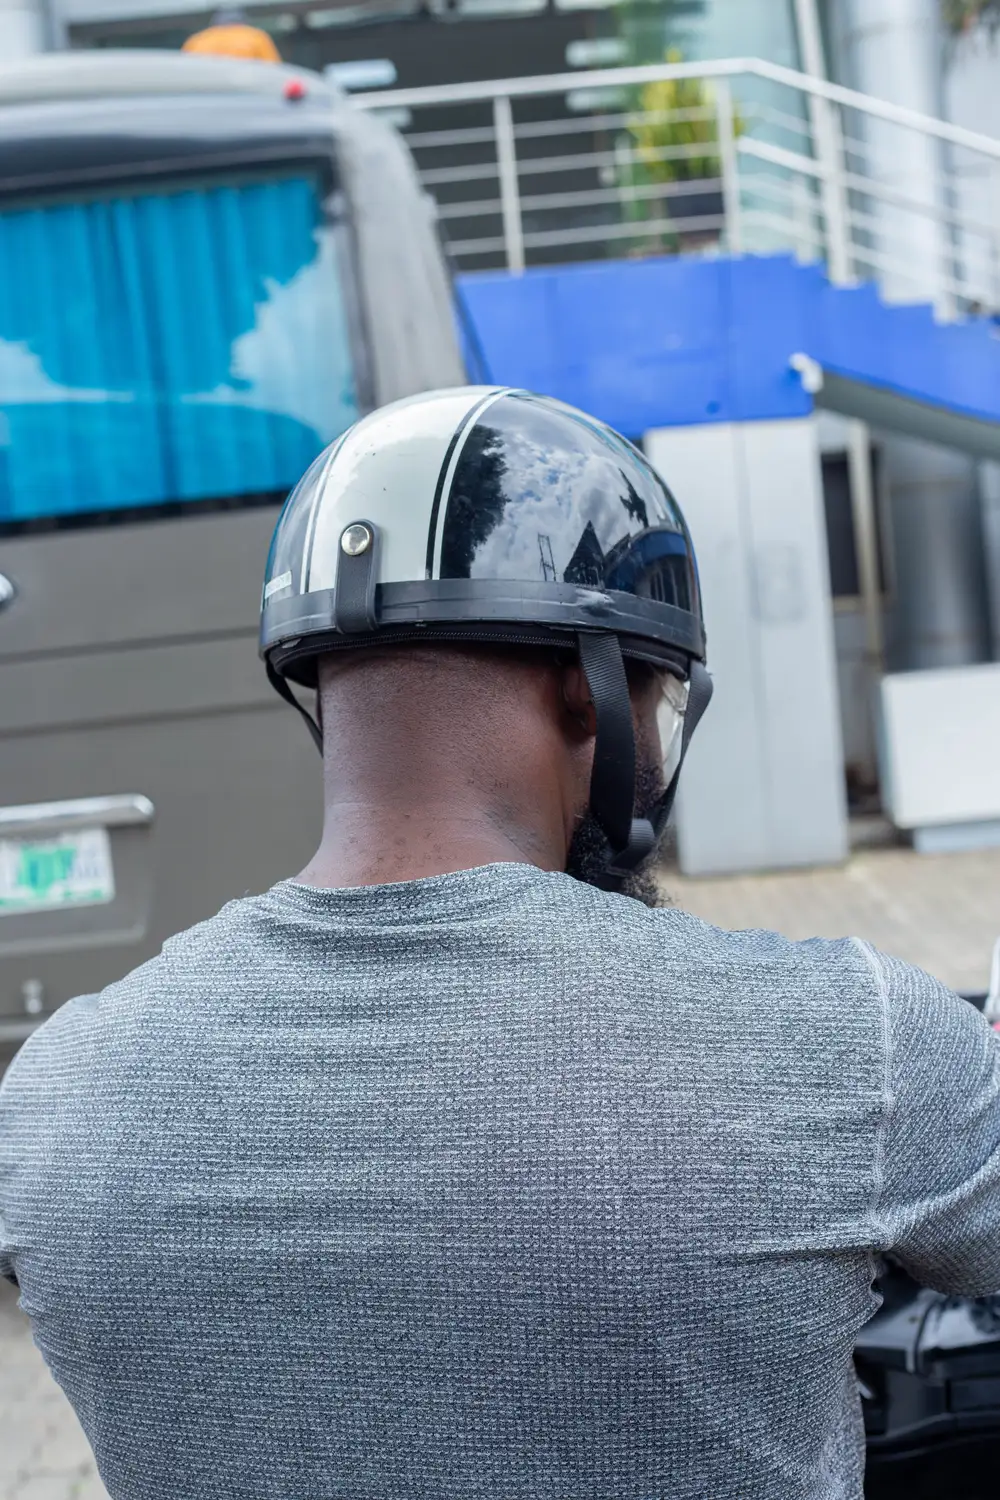 back view of a man on helmet